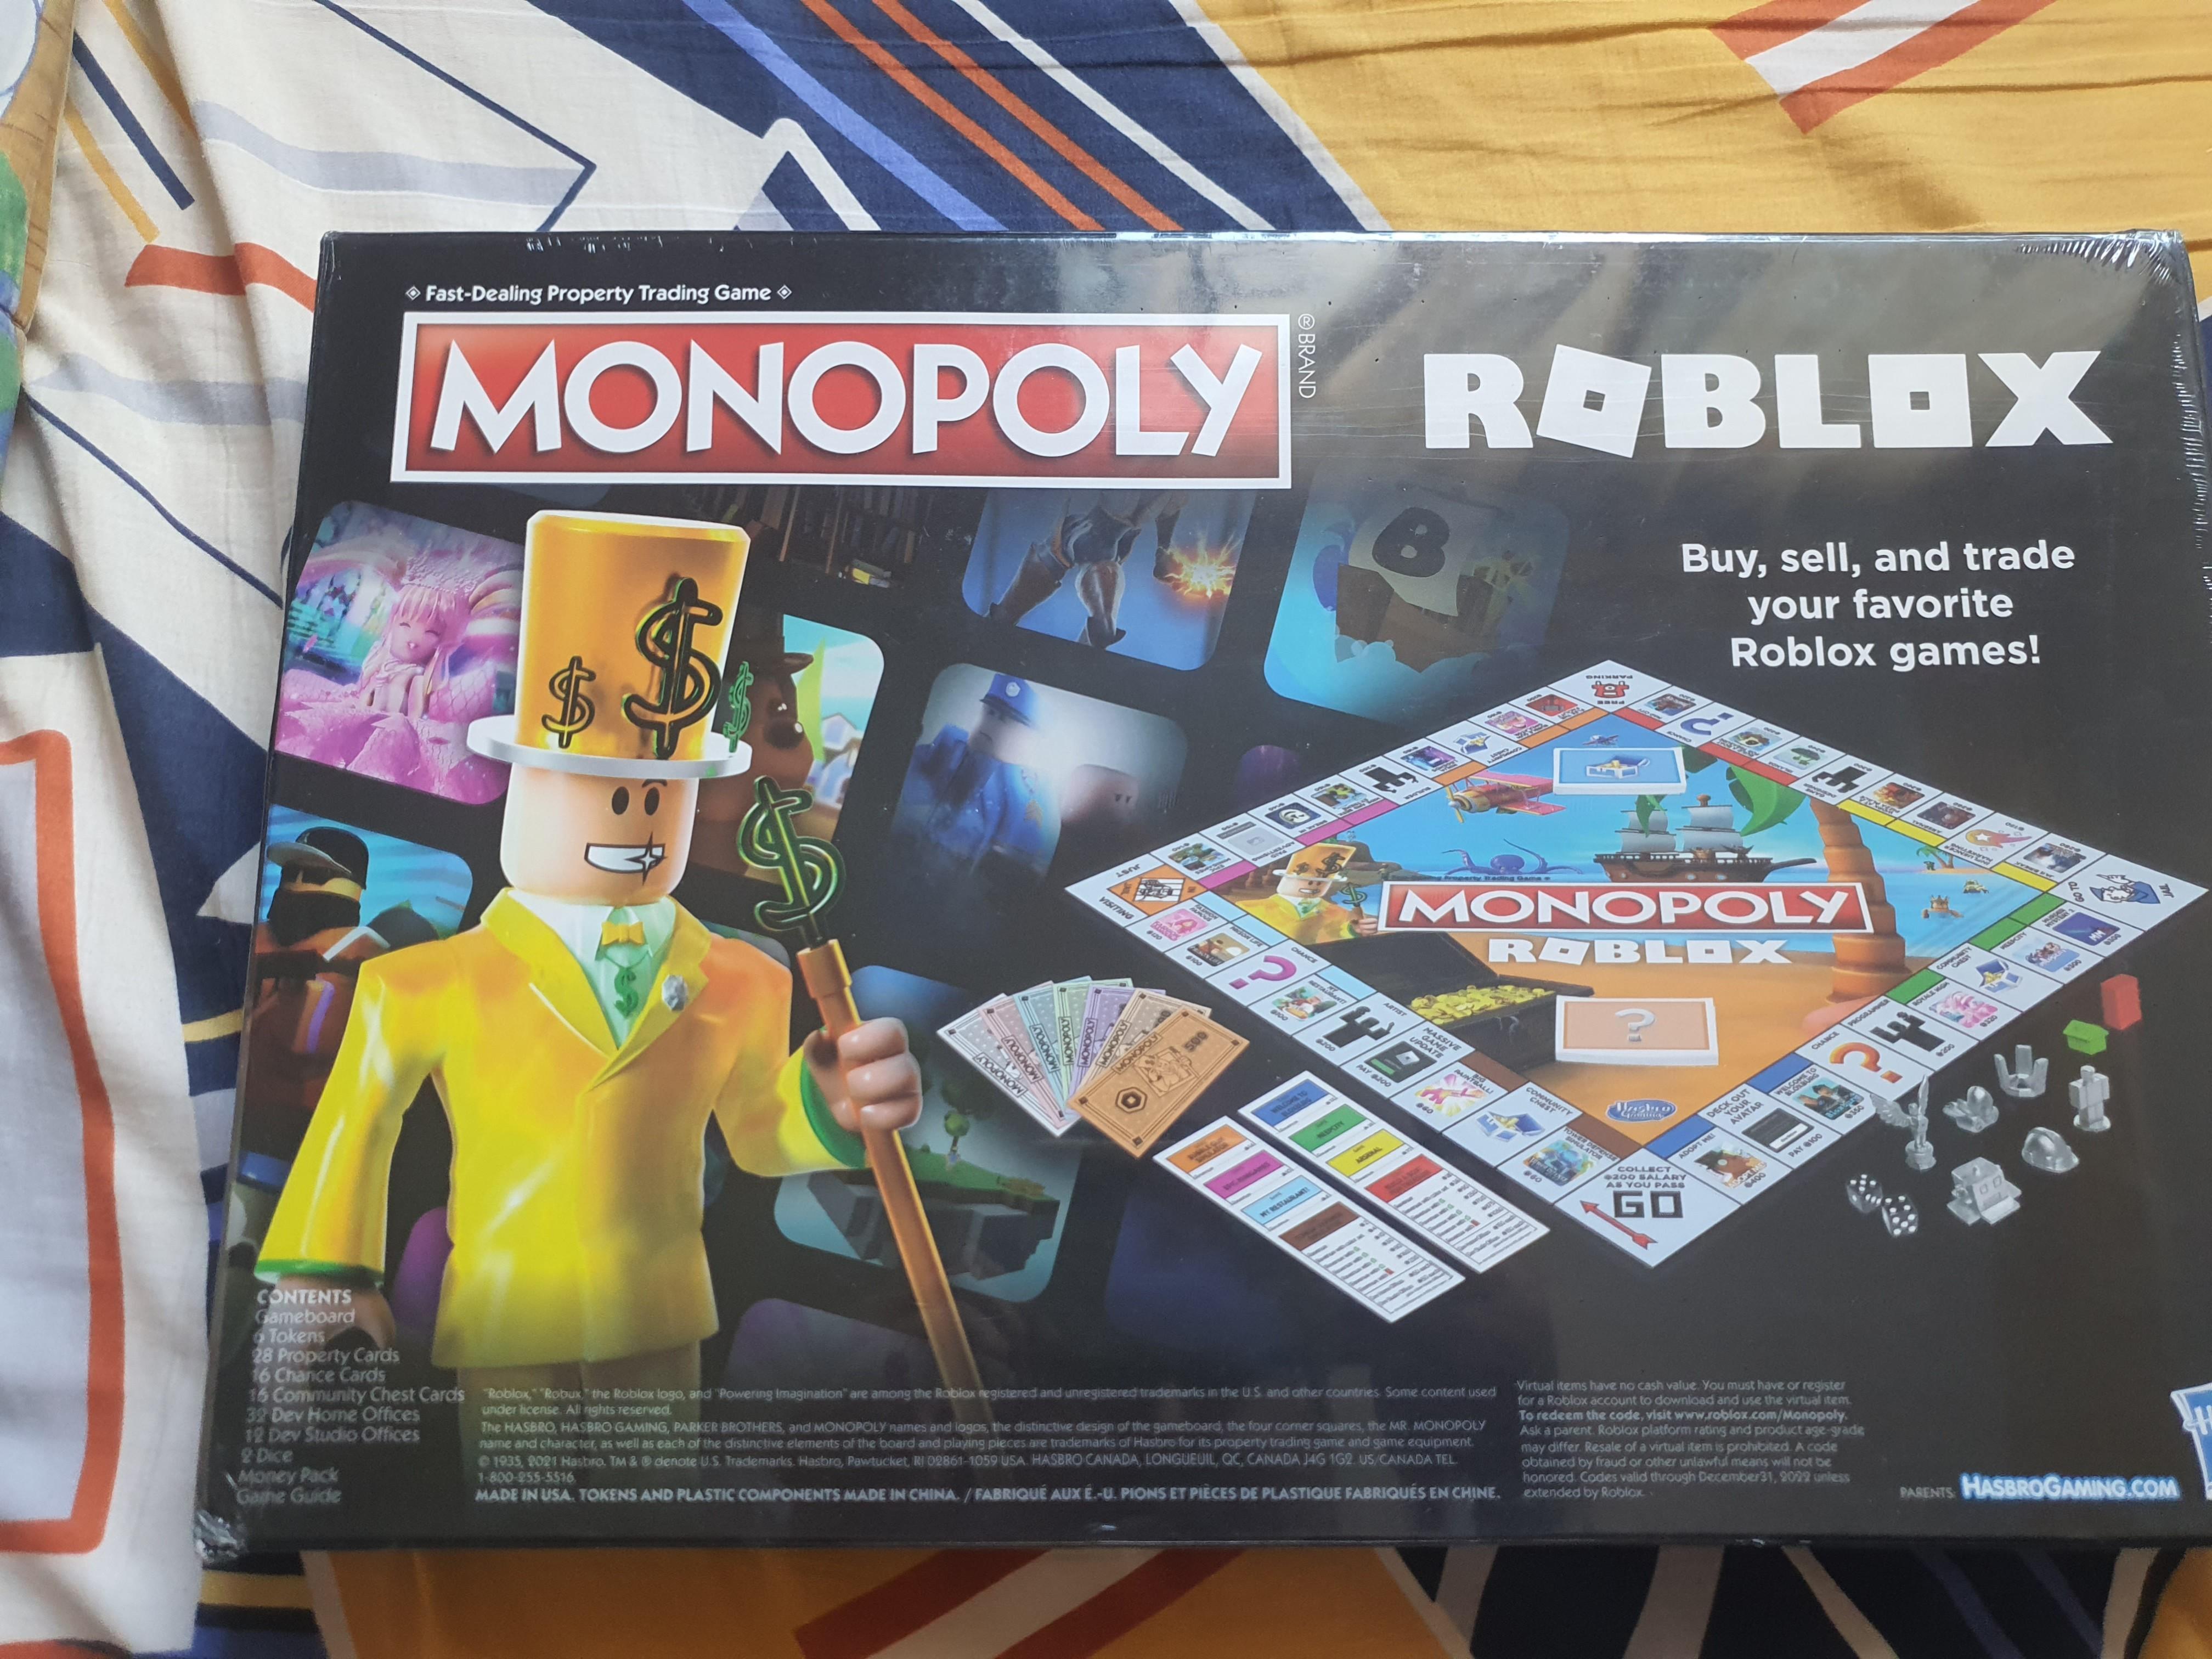 Monopoly: Roblox 2022 Edition Game @